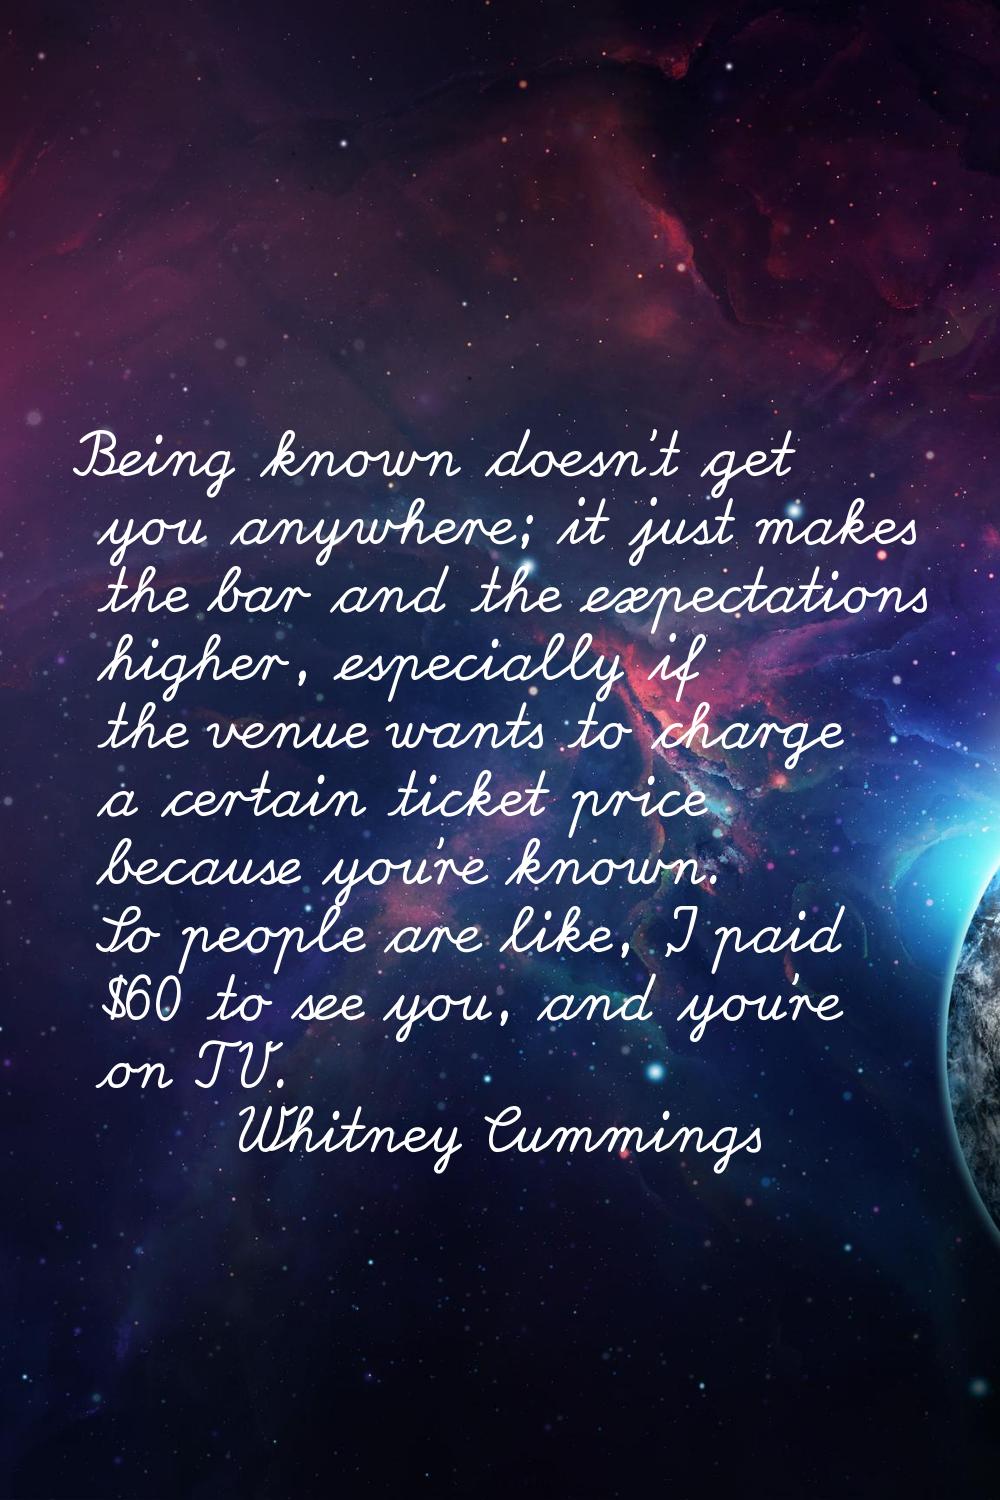 Being known doesn't get you anywhere; it just makes the bar and the expectations higher, especially